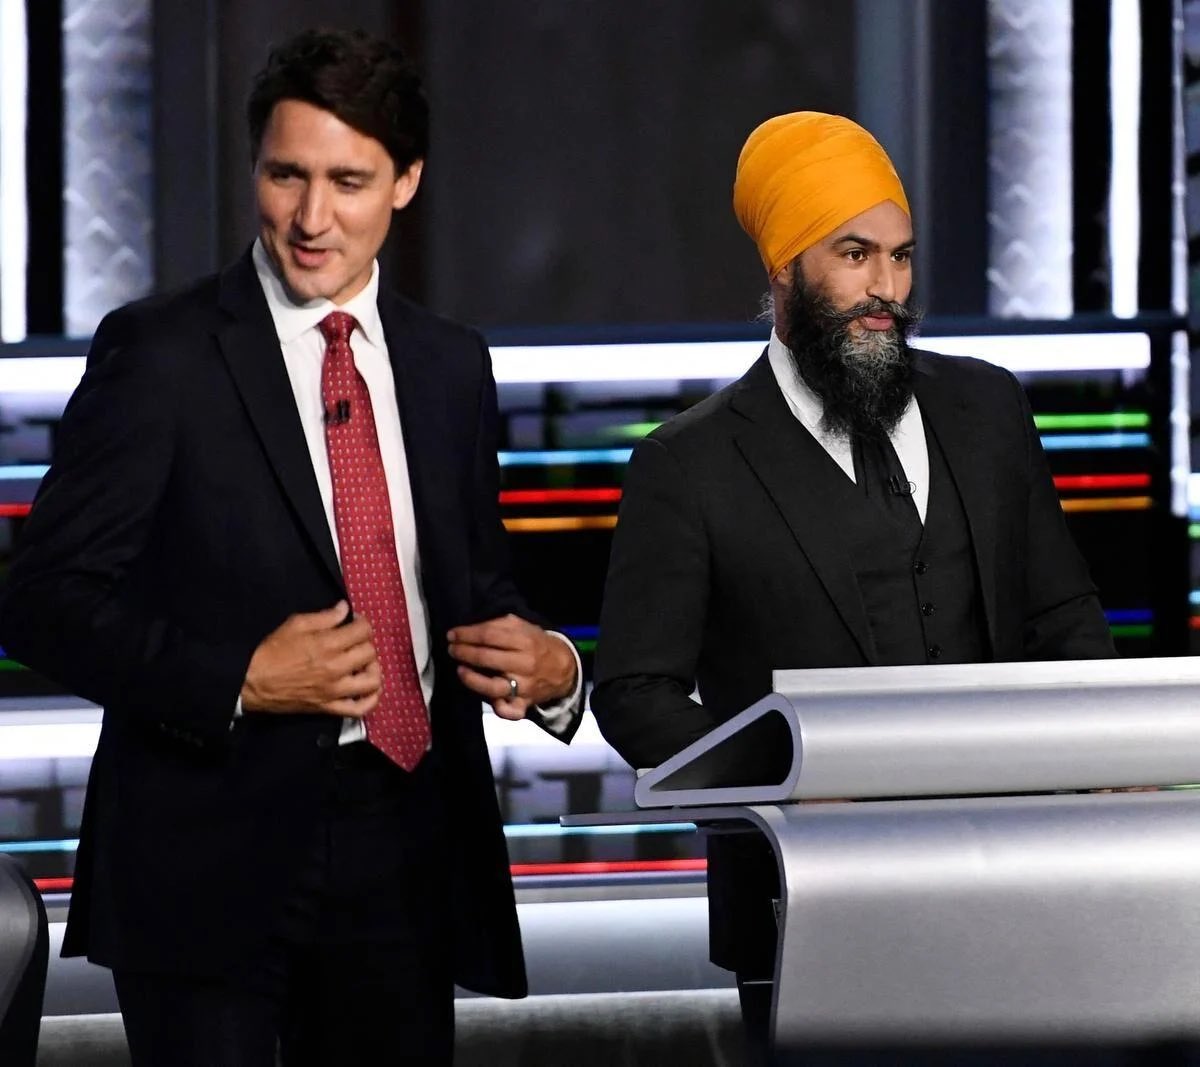 Prime Minister Trudeau could work with Jagmeet Singh right now to implement a #ProportionalRepresentation system for our next election, which would significantly improve our democracy. 

But he doesn’t want to do it